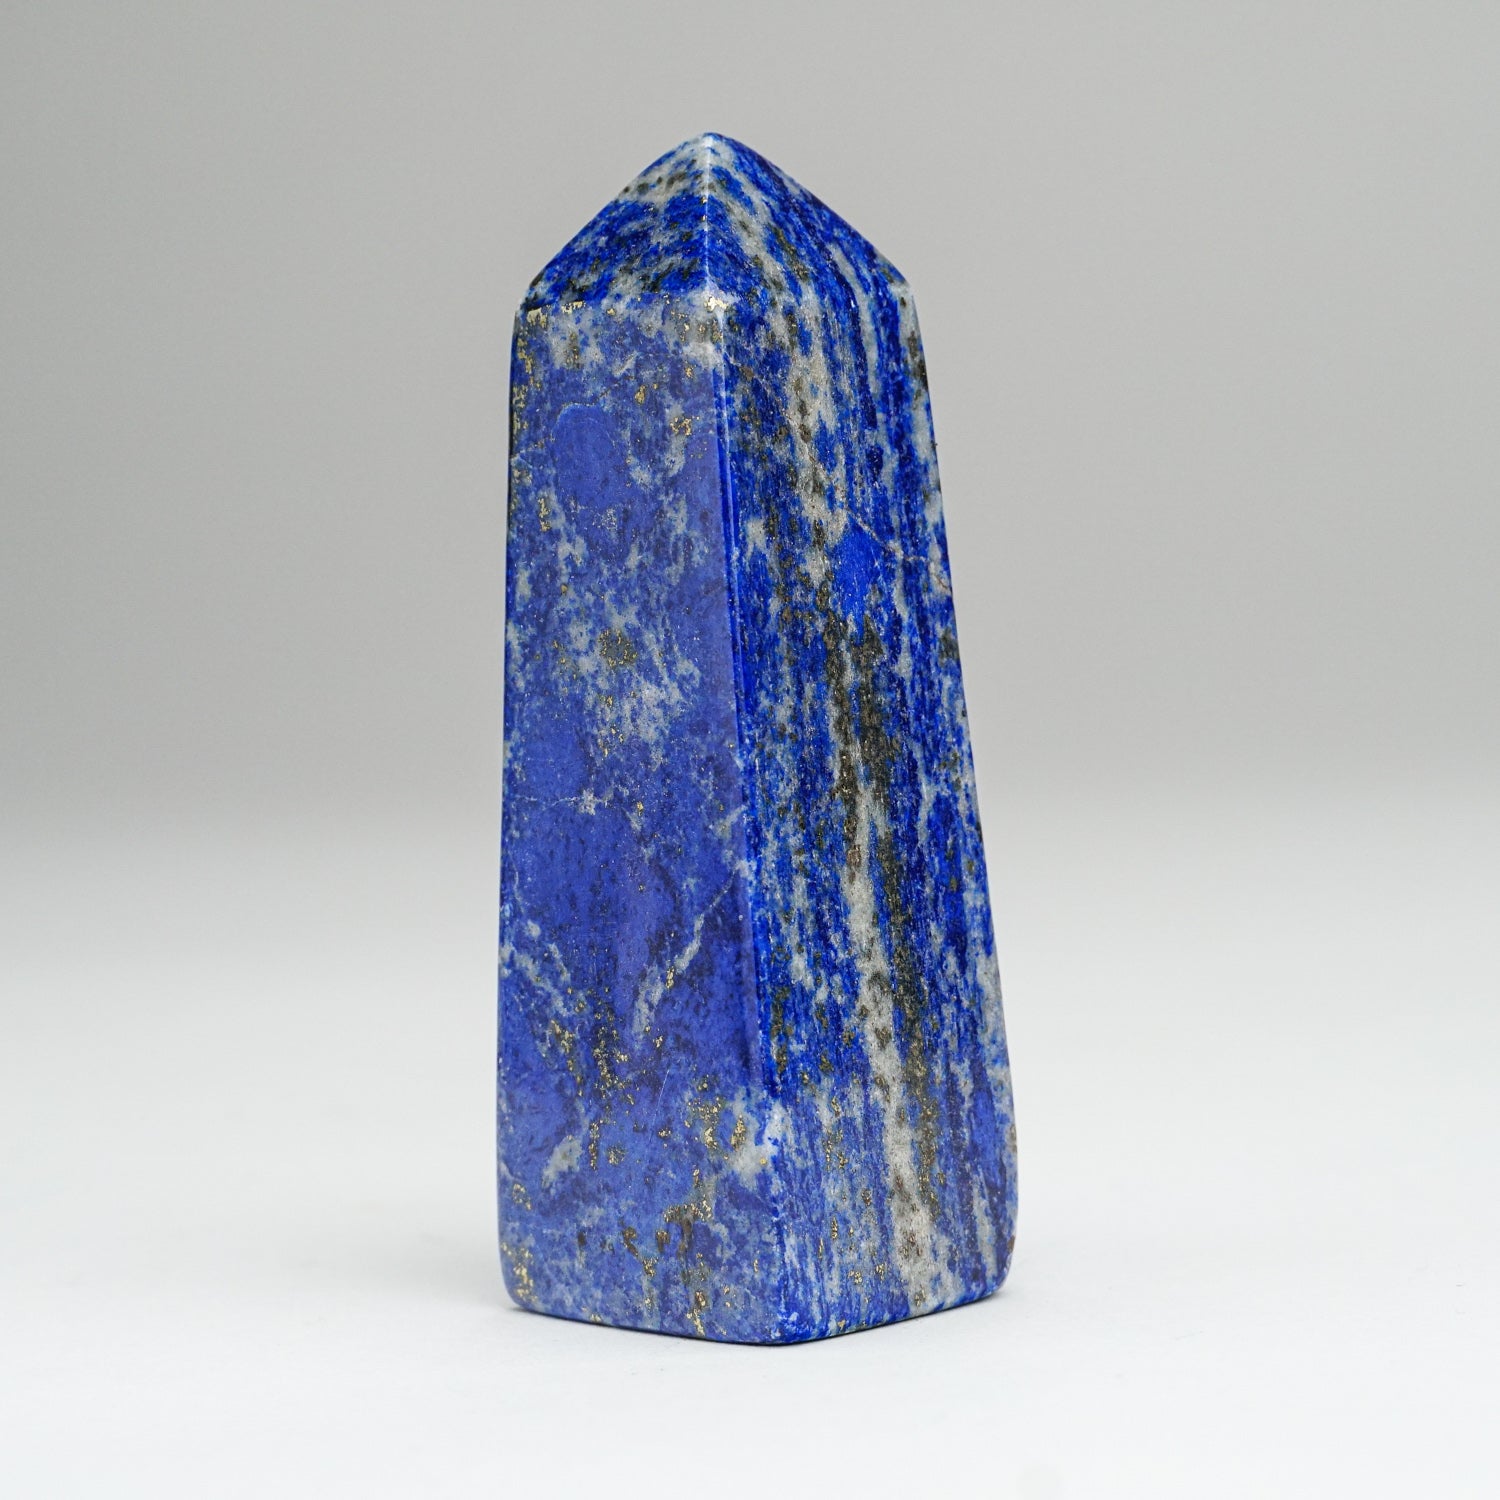 Polished Lapis Lazuli Point from Afghanistan (237 grams)